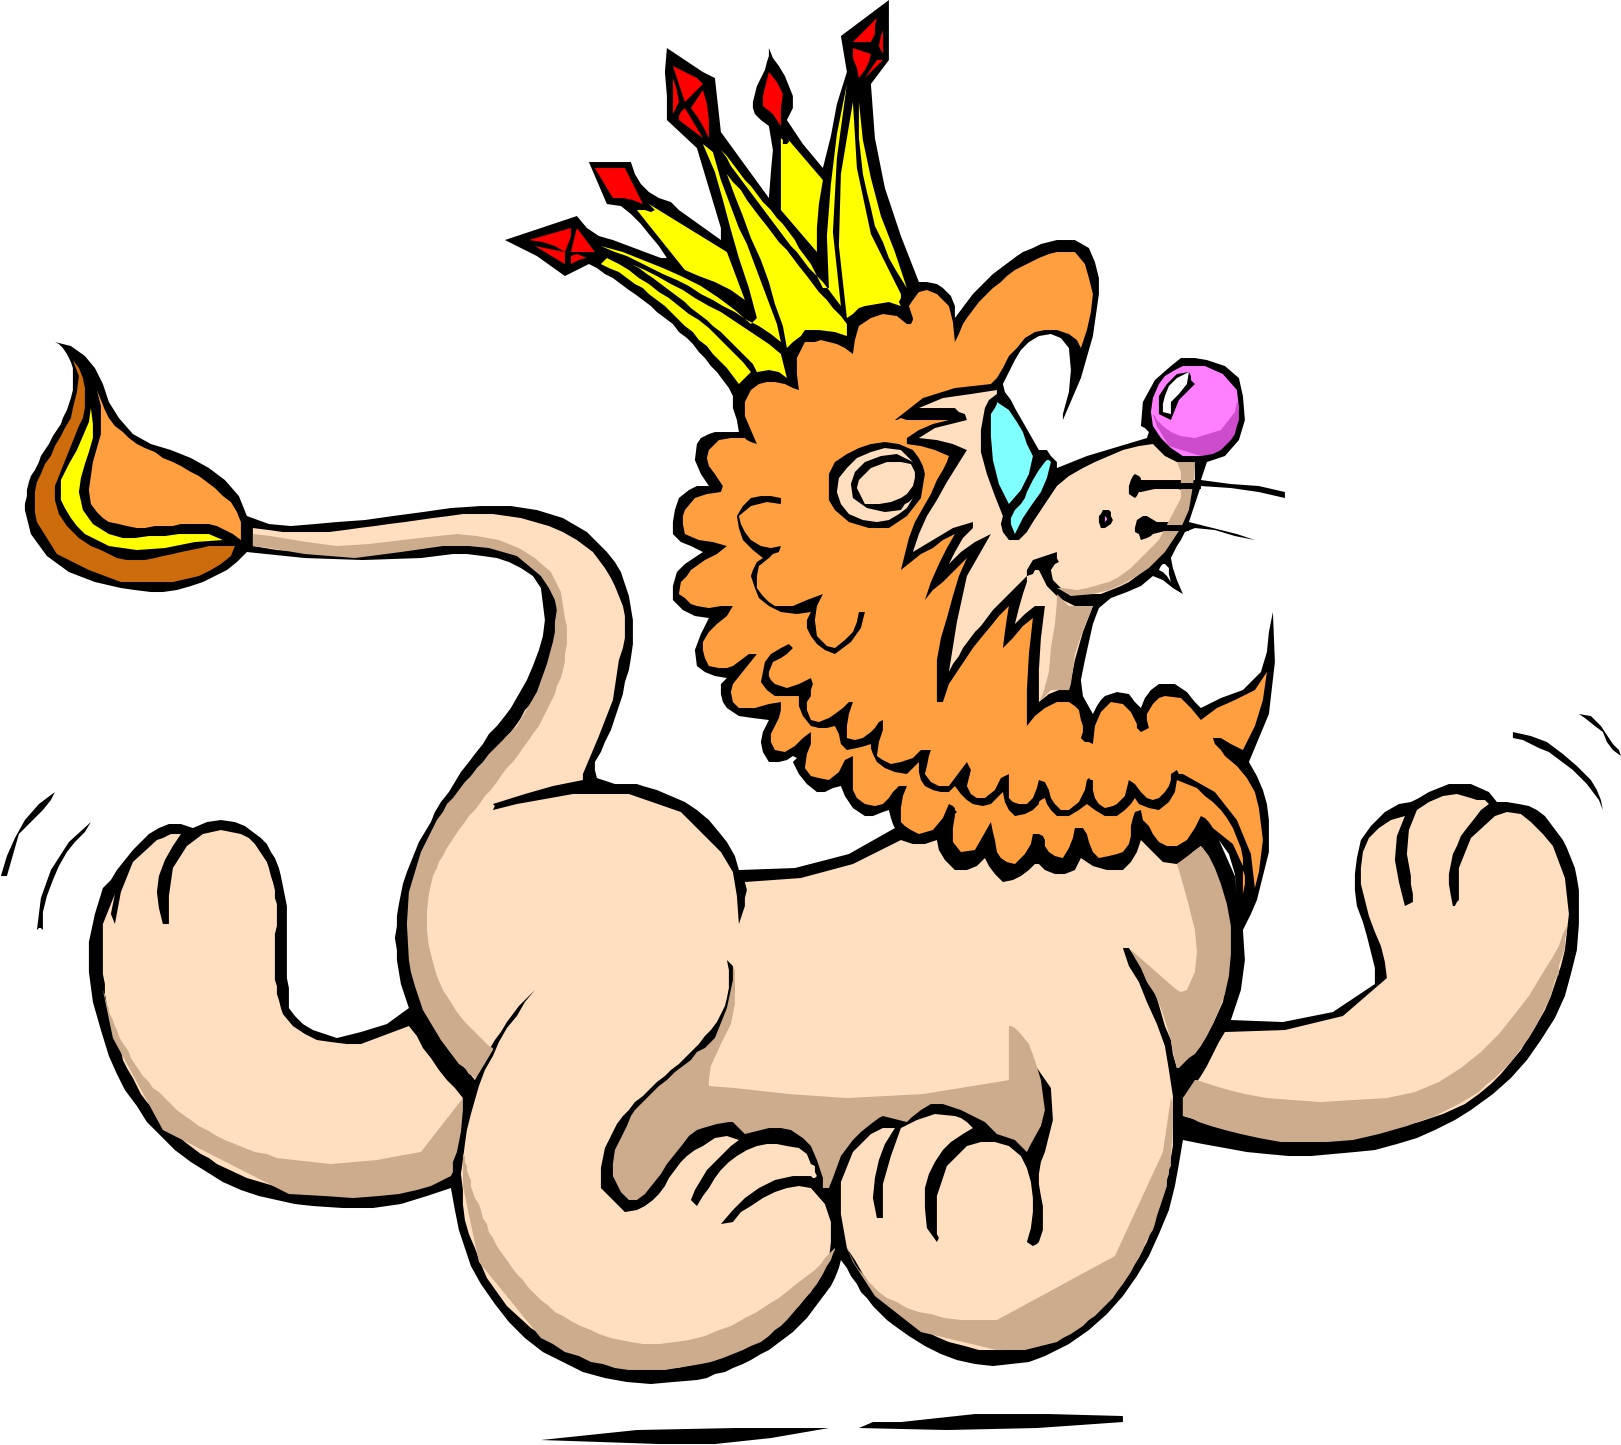 Picture Of A Cartoon Lion - ClipArt Best